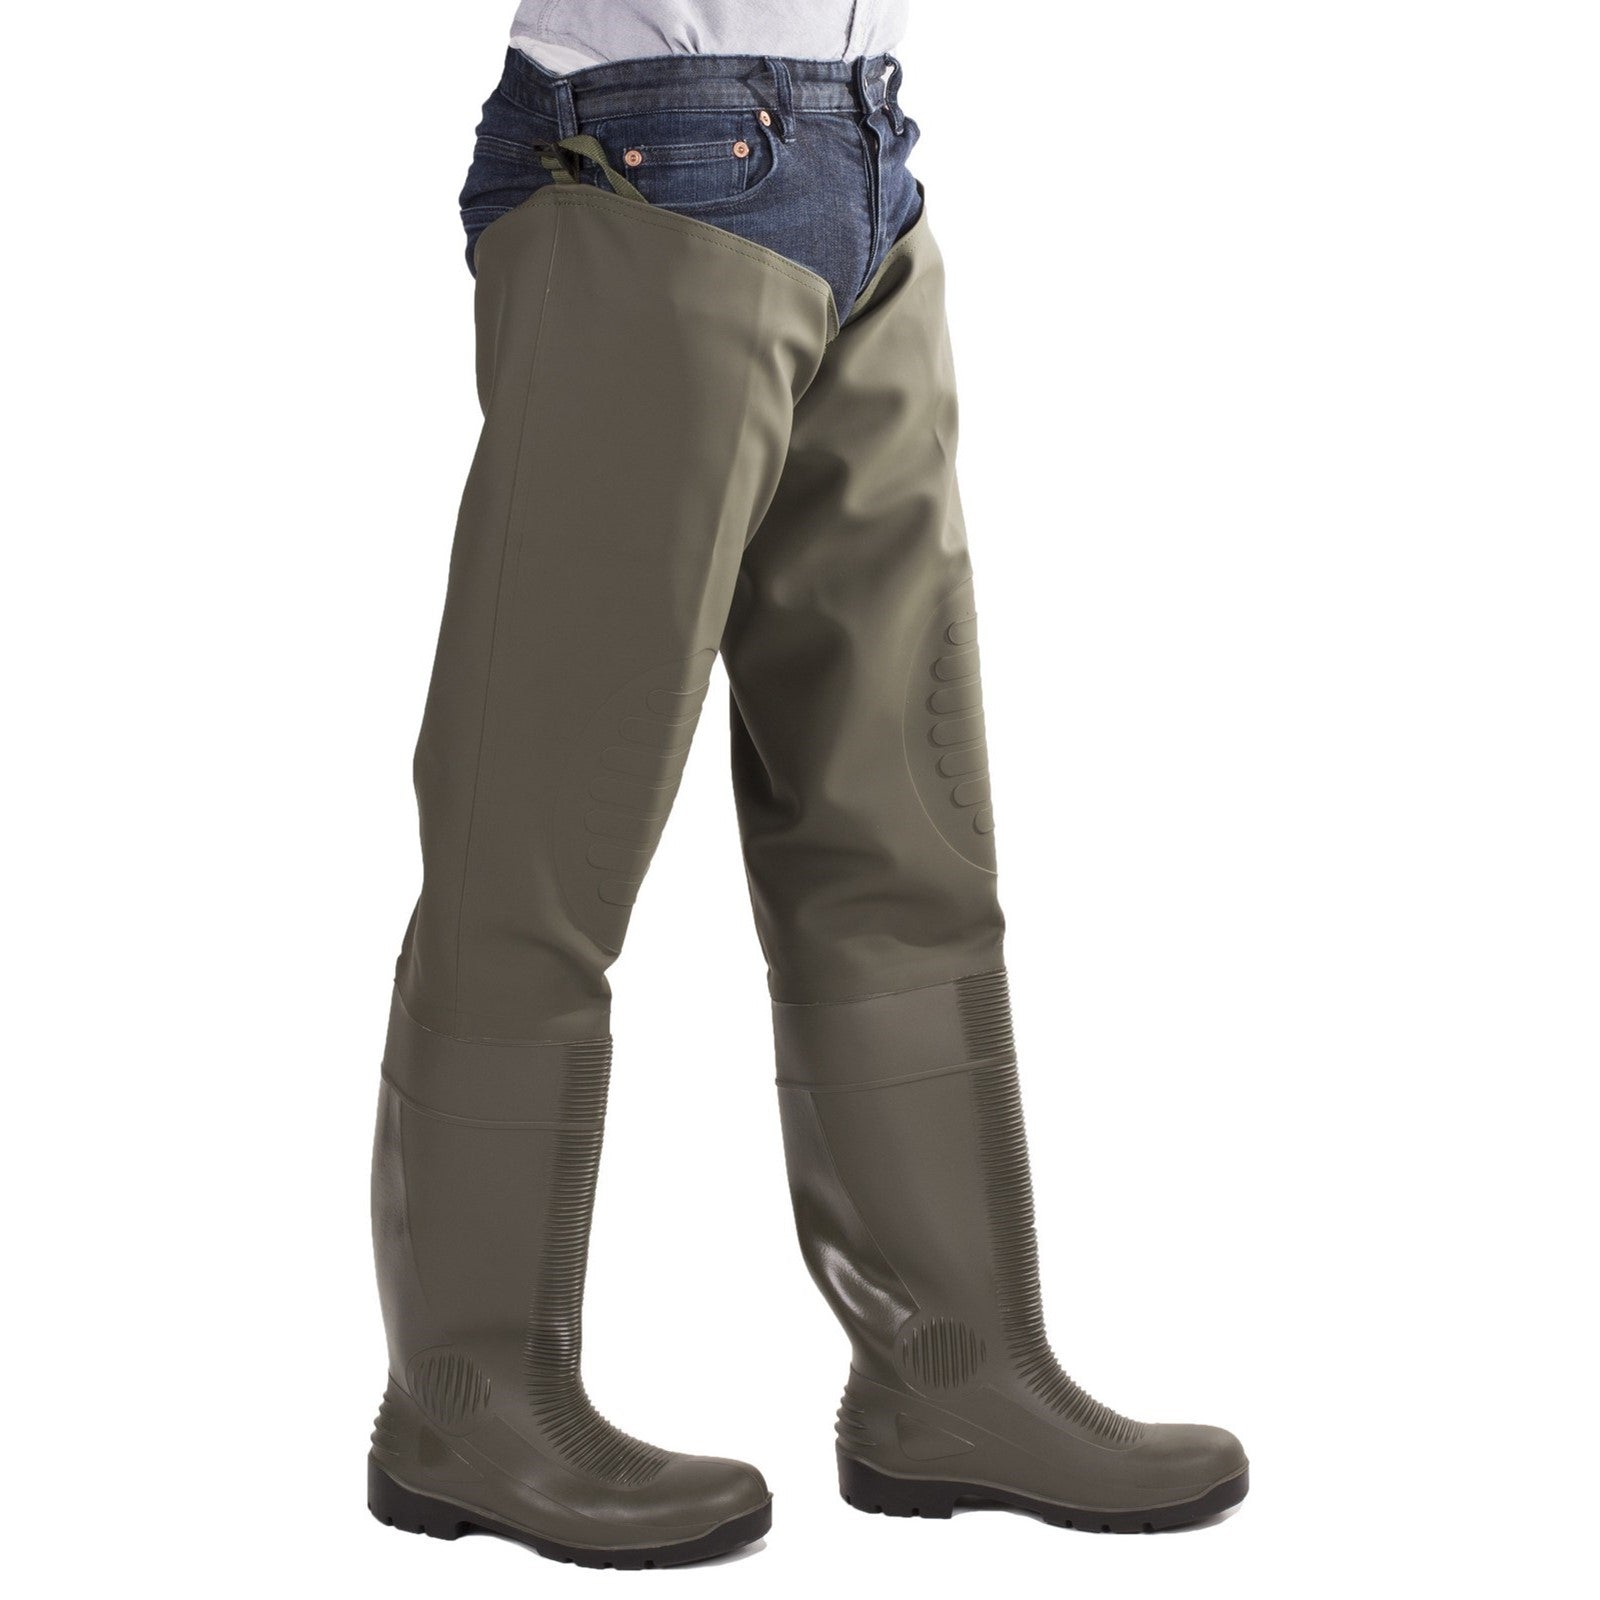 Forth Thigh Safety Wader, Amblers Safety